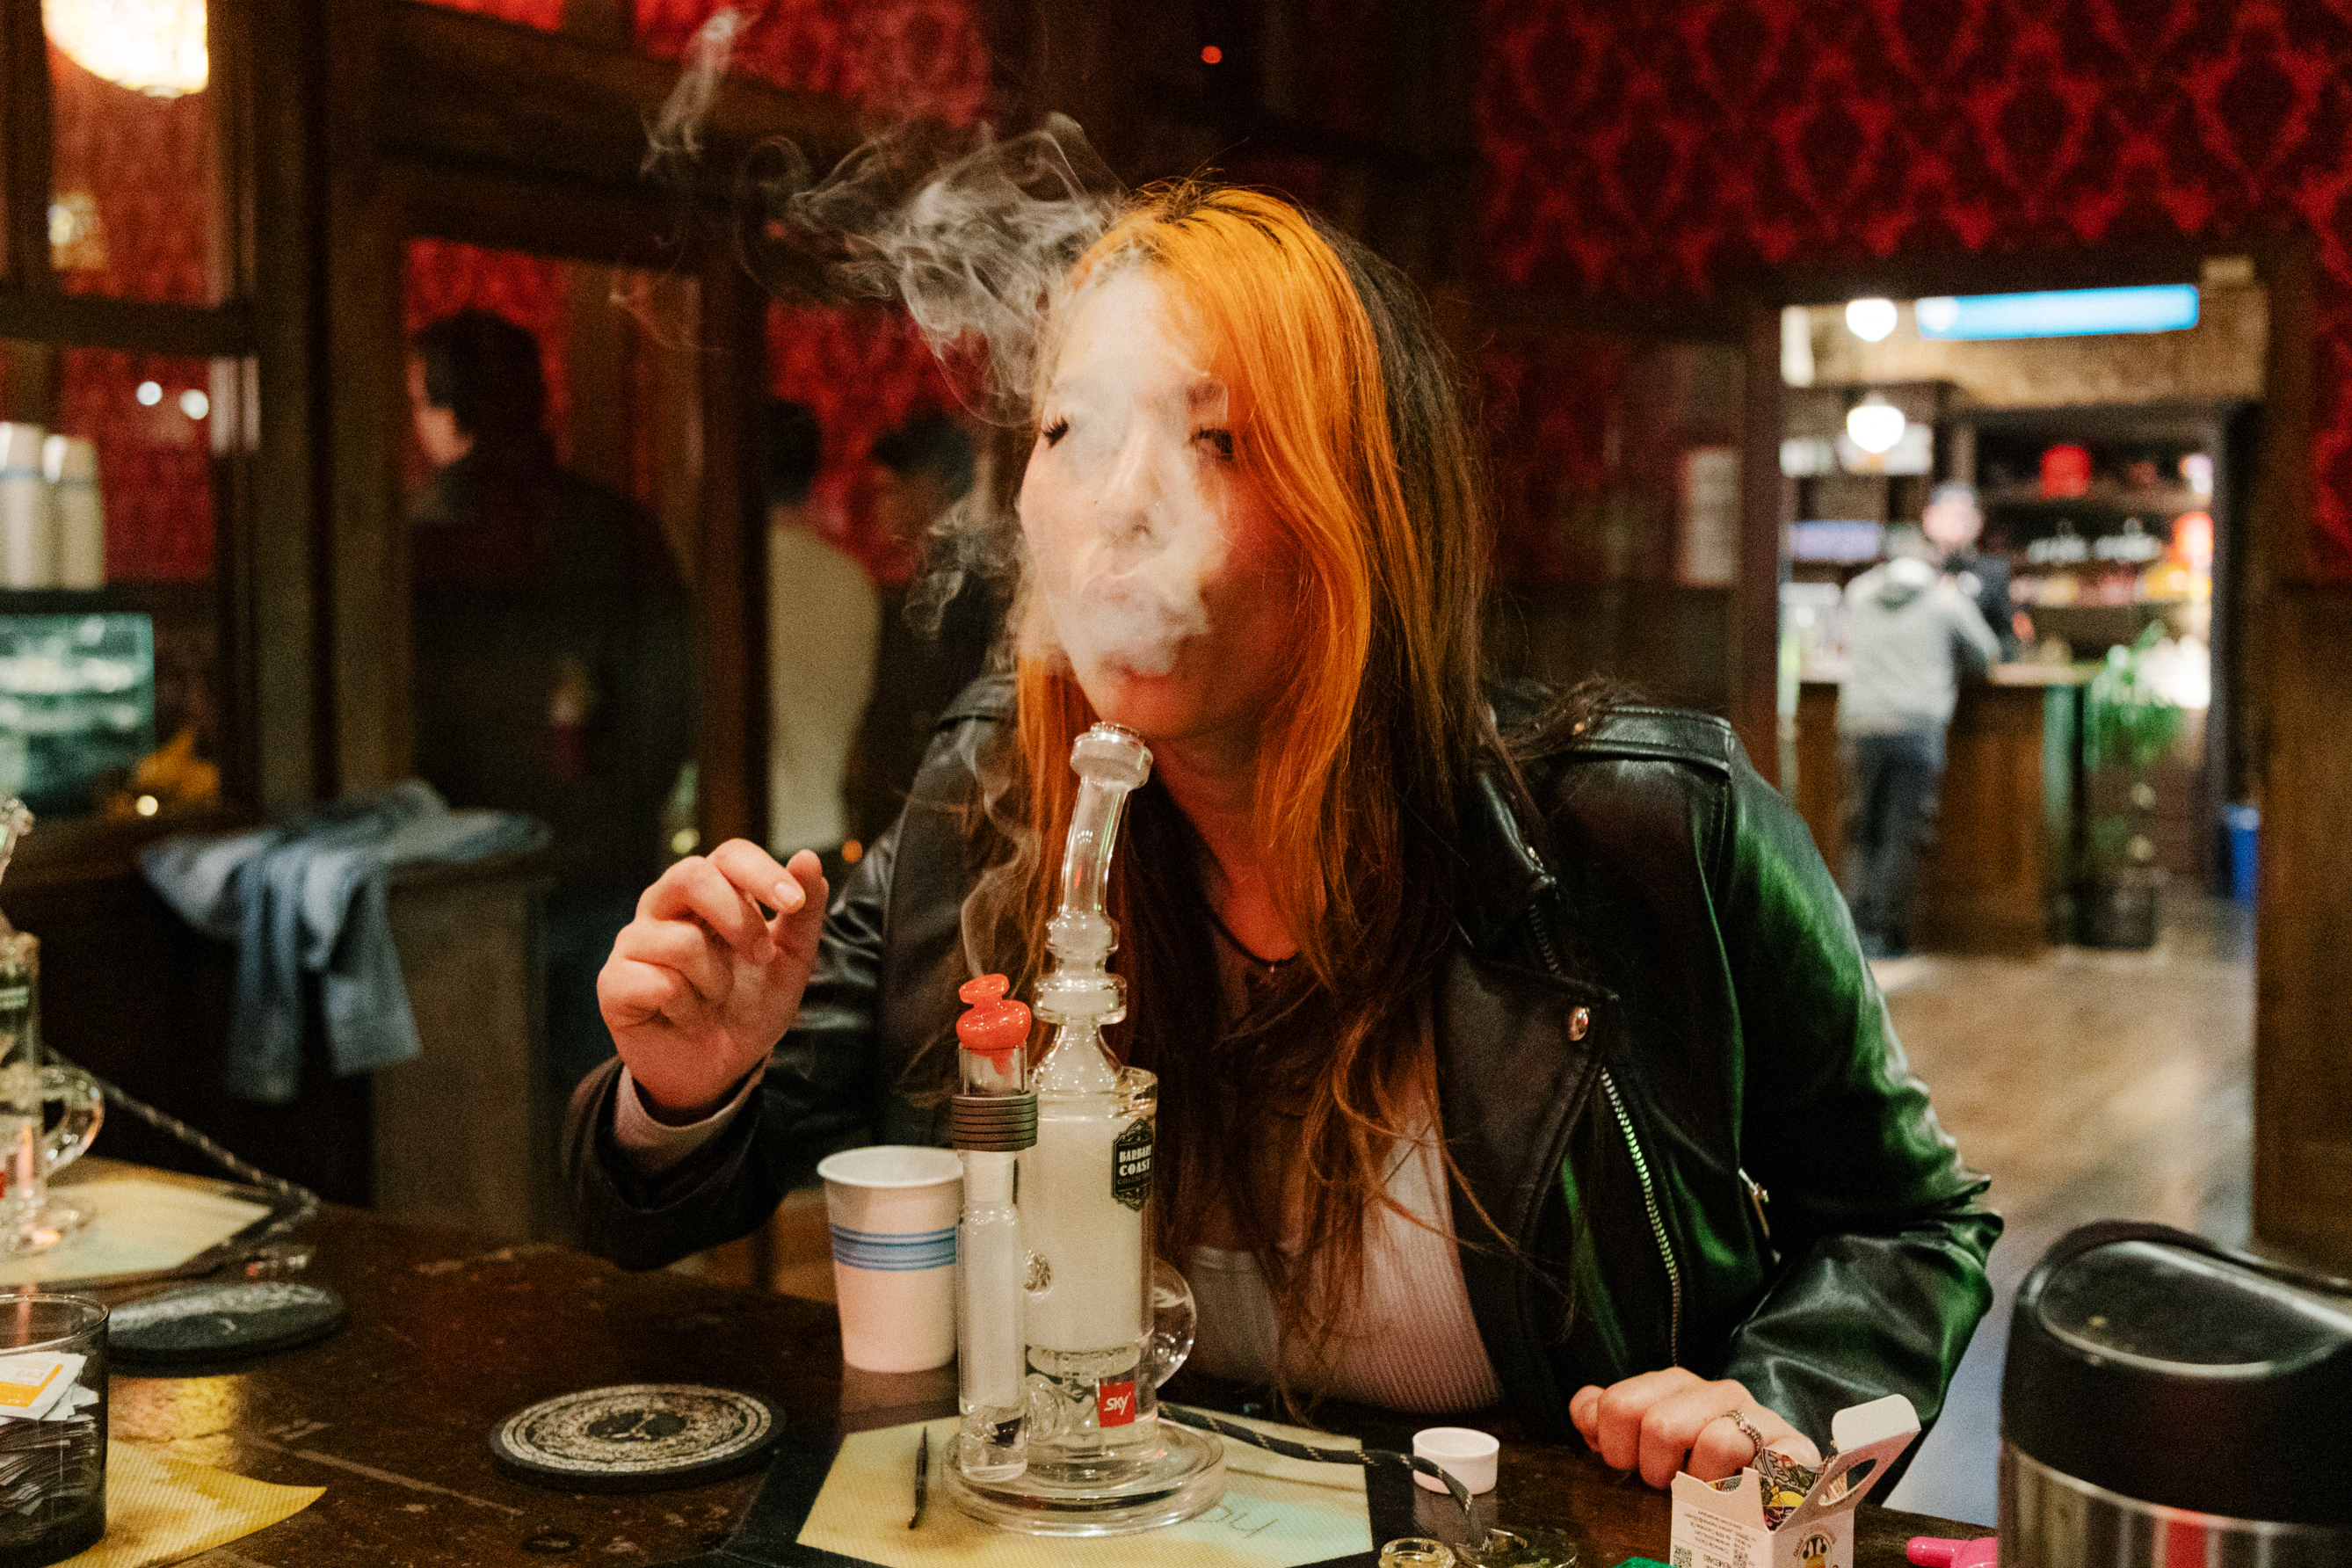 A woman blows out smoke after smoking out of a cannabis pipe in a cannabis dipsensary - some people are in the background shopping for cannabis merchandise.